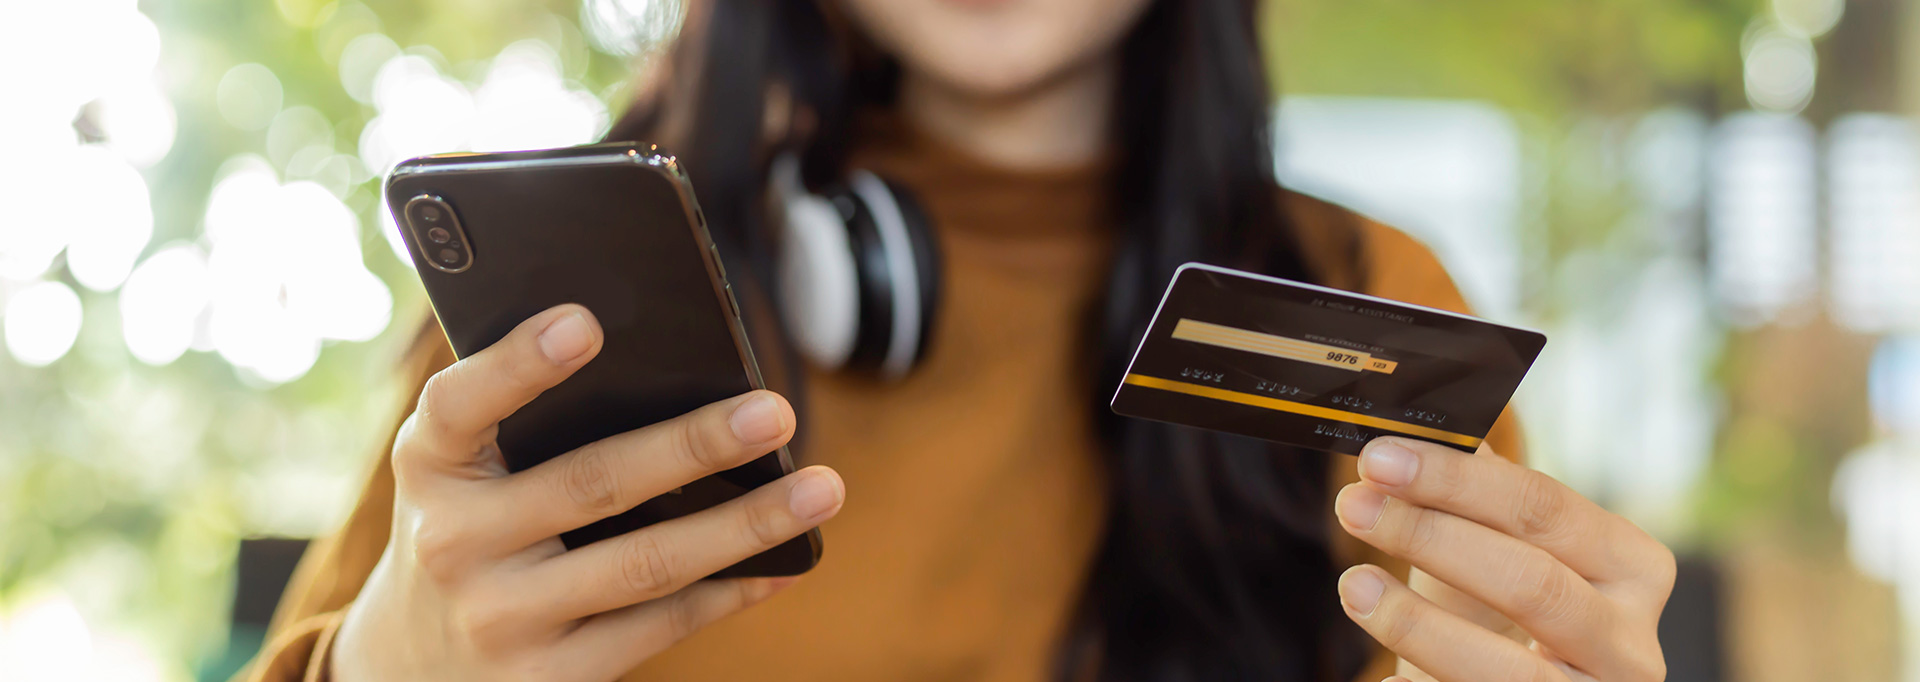 girl holding credit card and phone